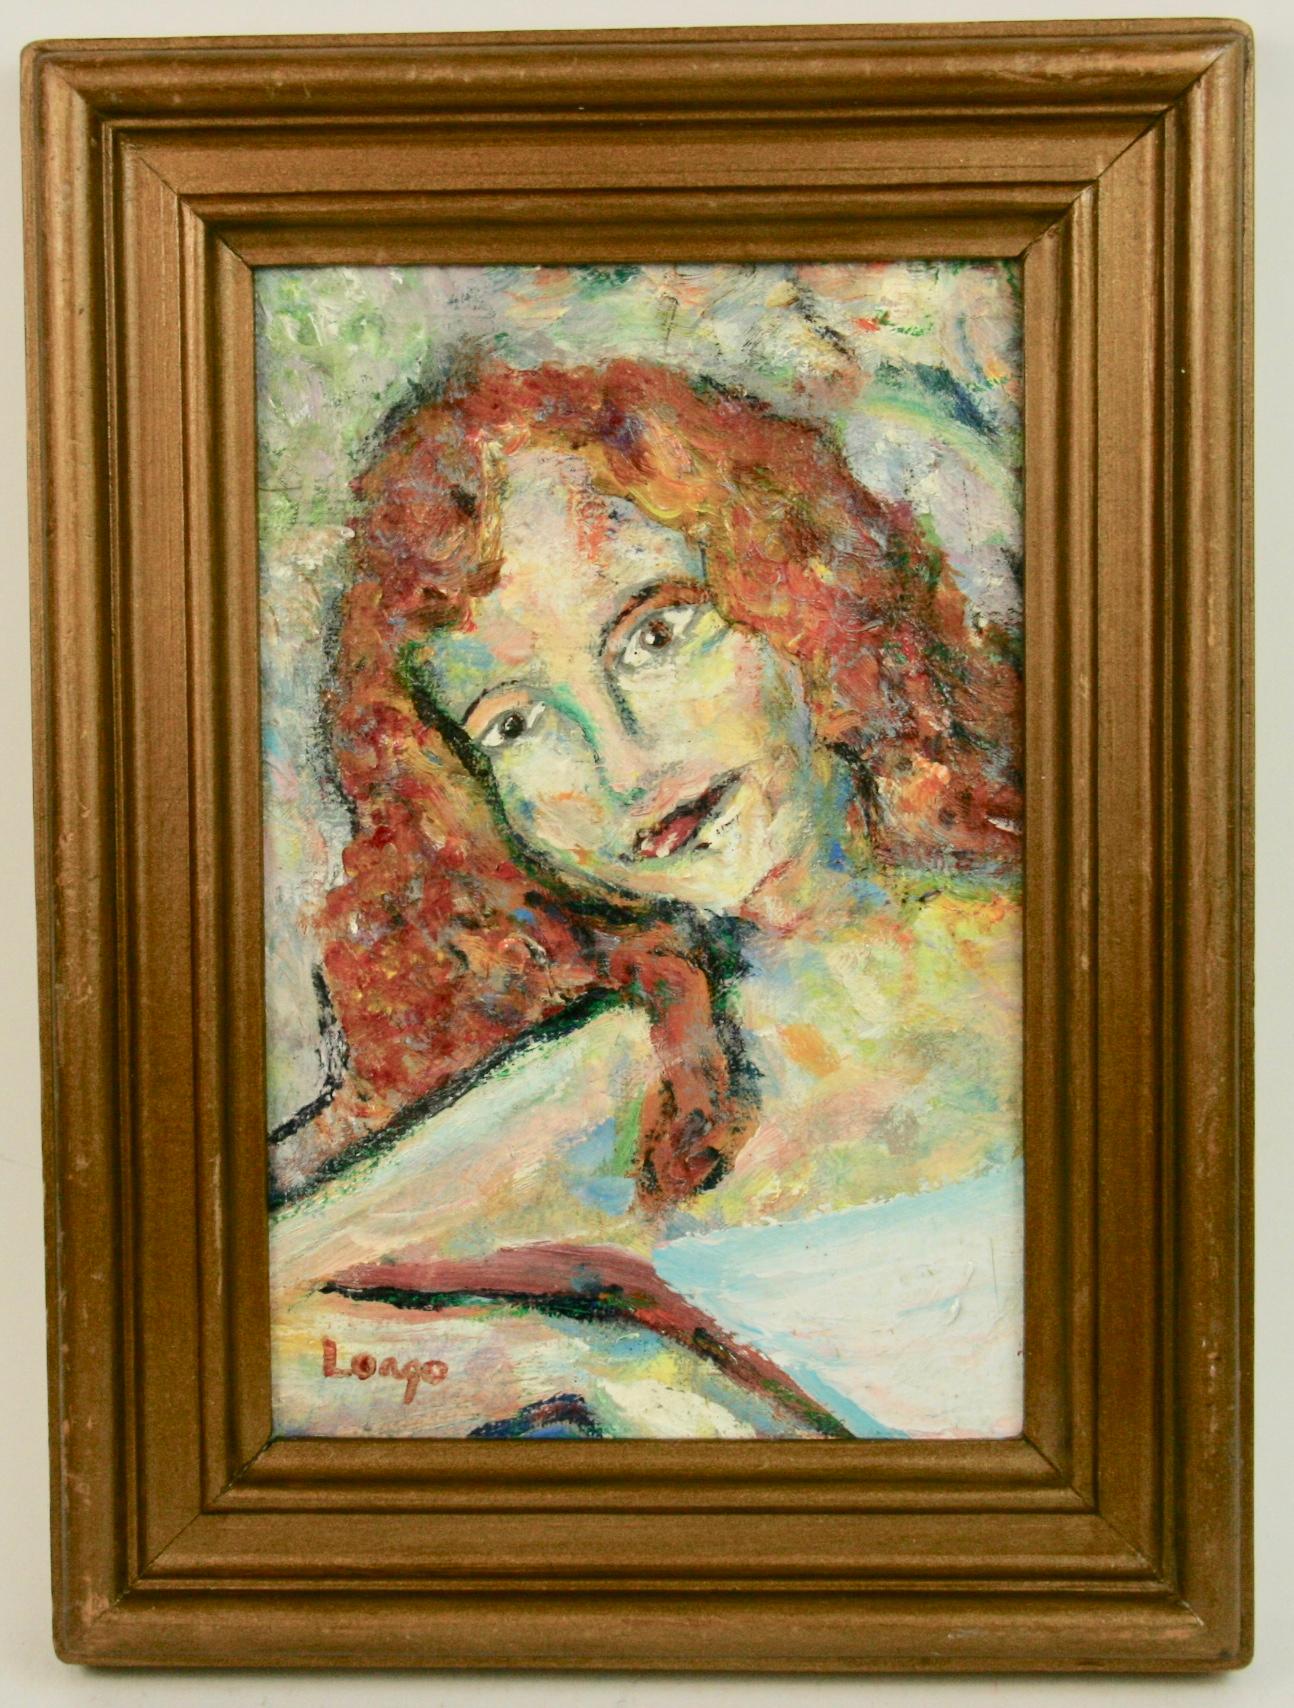 Vintage Redhead Female  Portrait oil Painting 1960's - Brown Figurative Painting by Longo